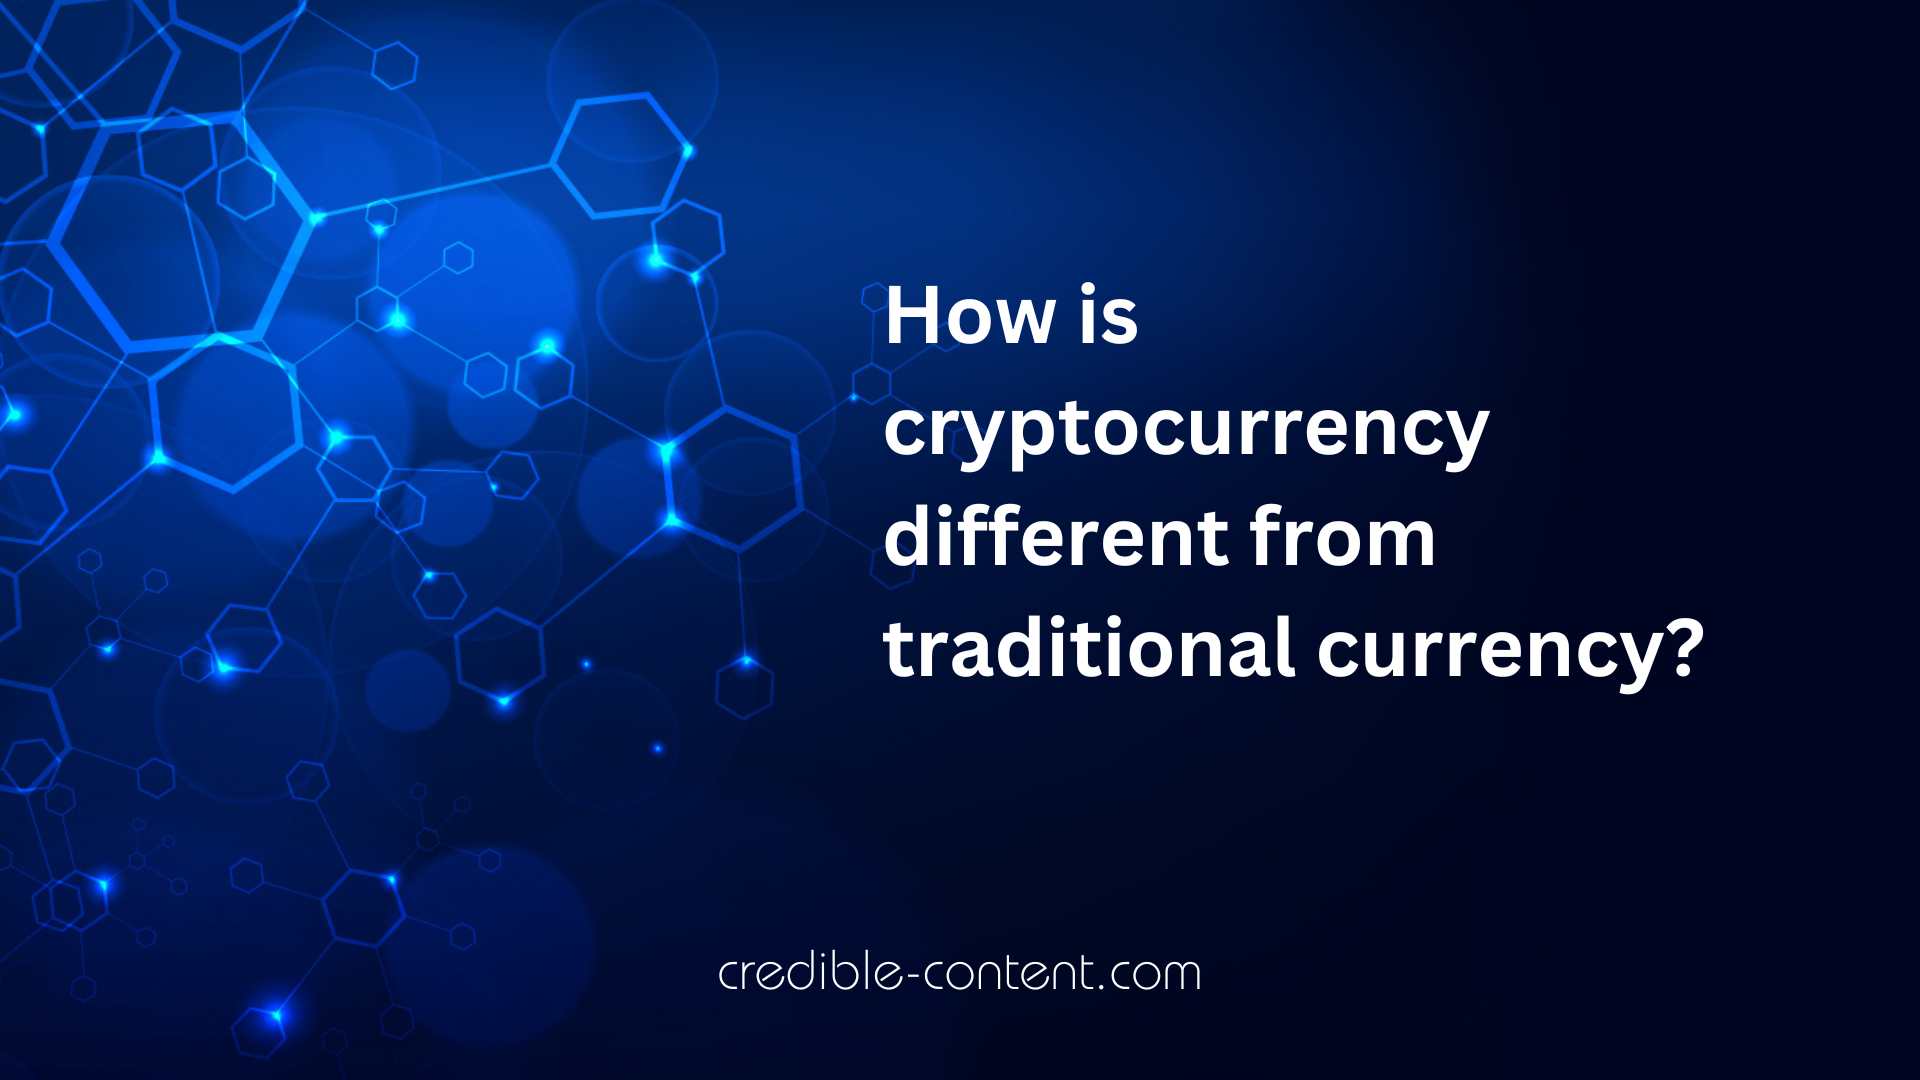 How is cryptocurrency different from traditional currency